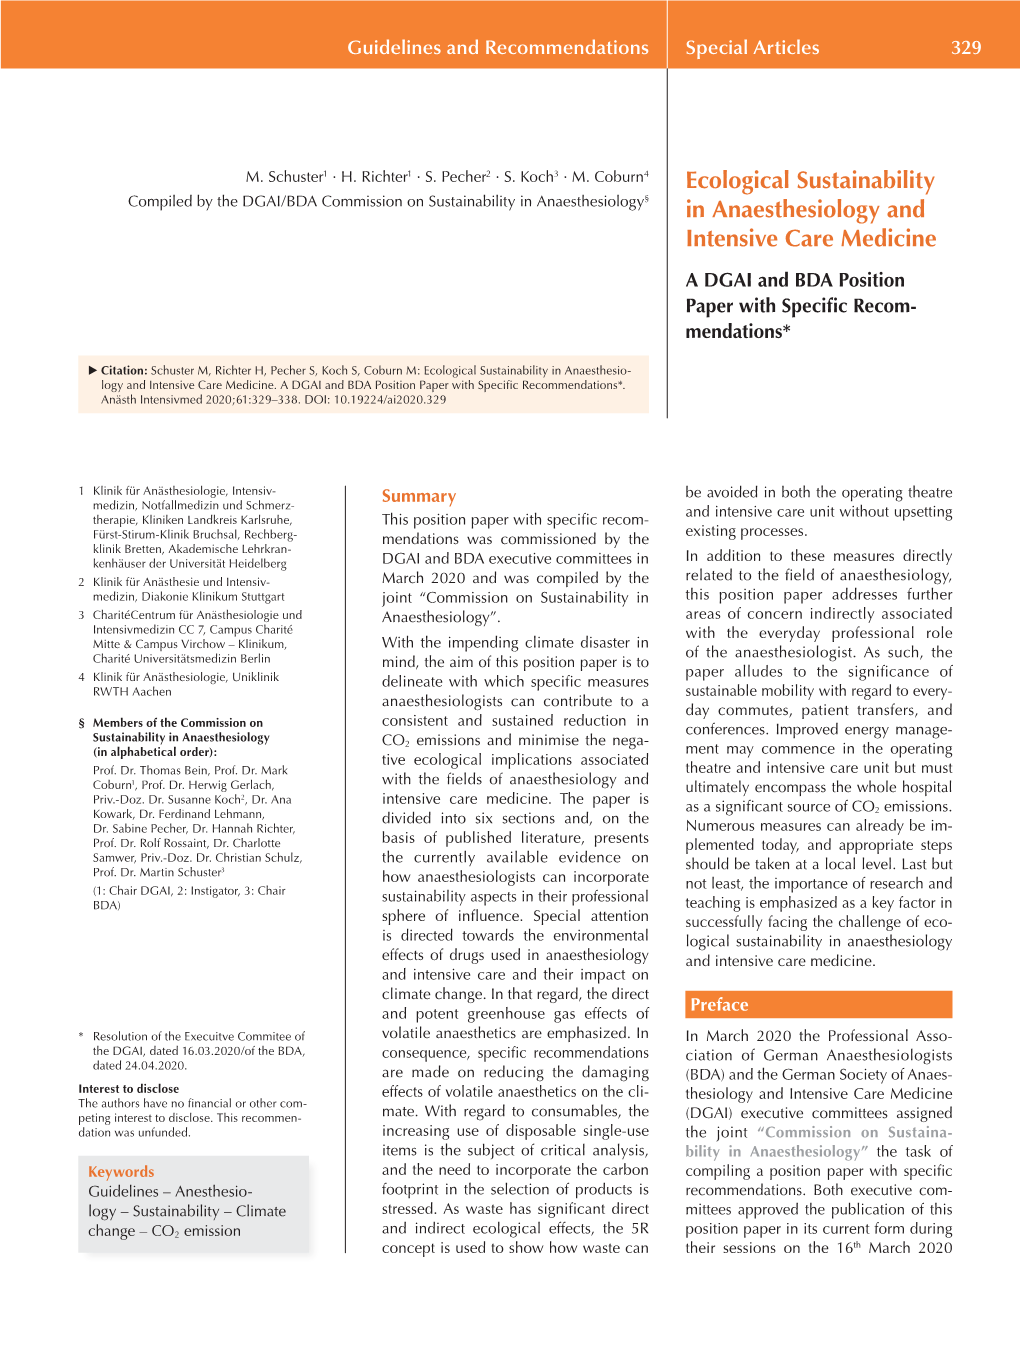 Ecological Sustainability in Anaesthesiology and Intensive Care Medicine